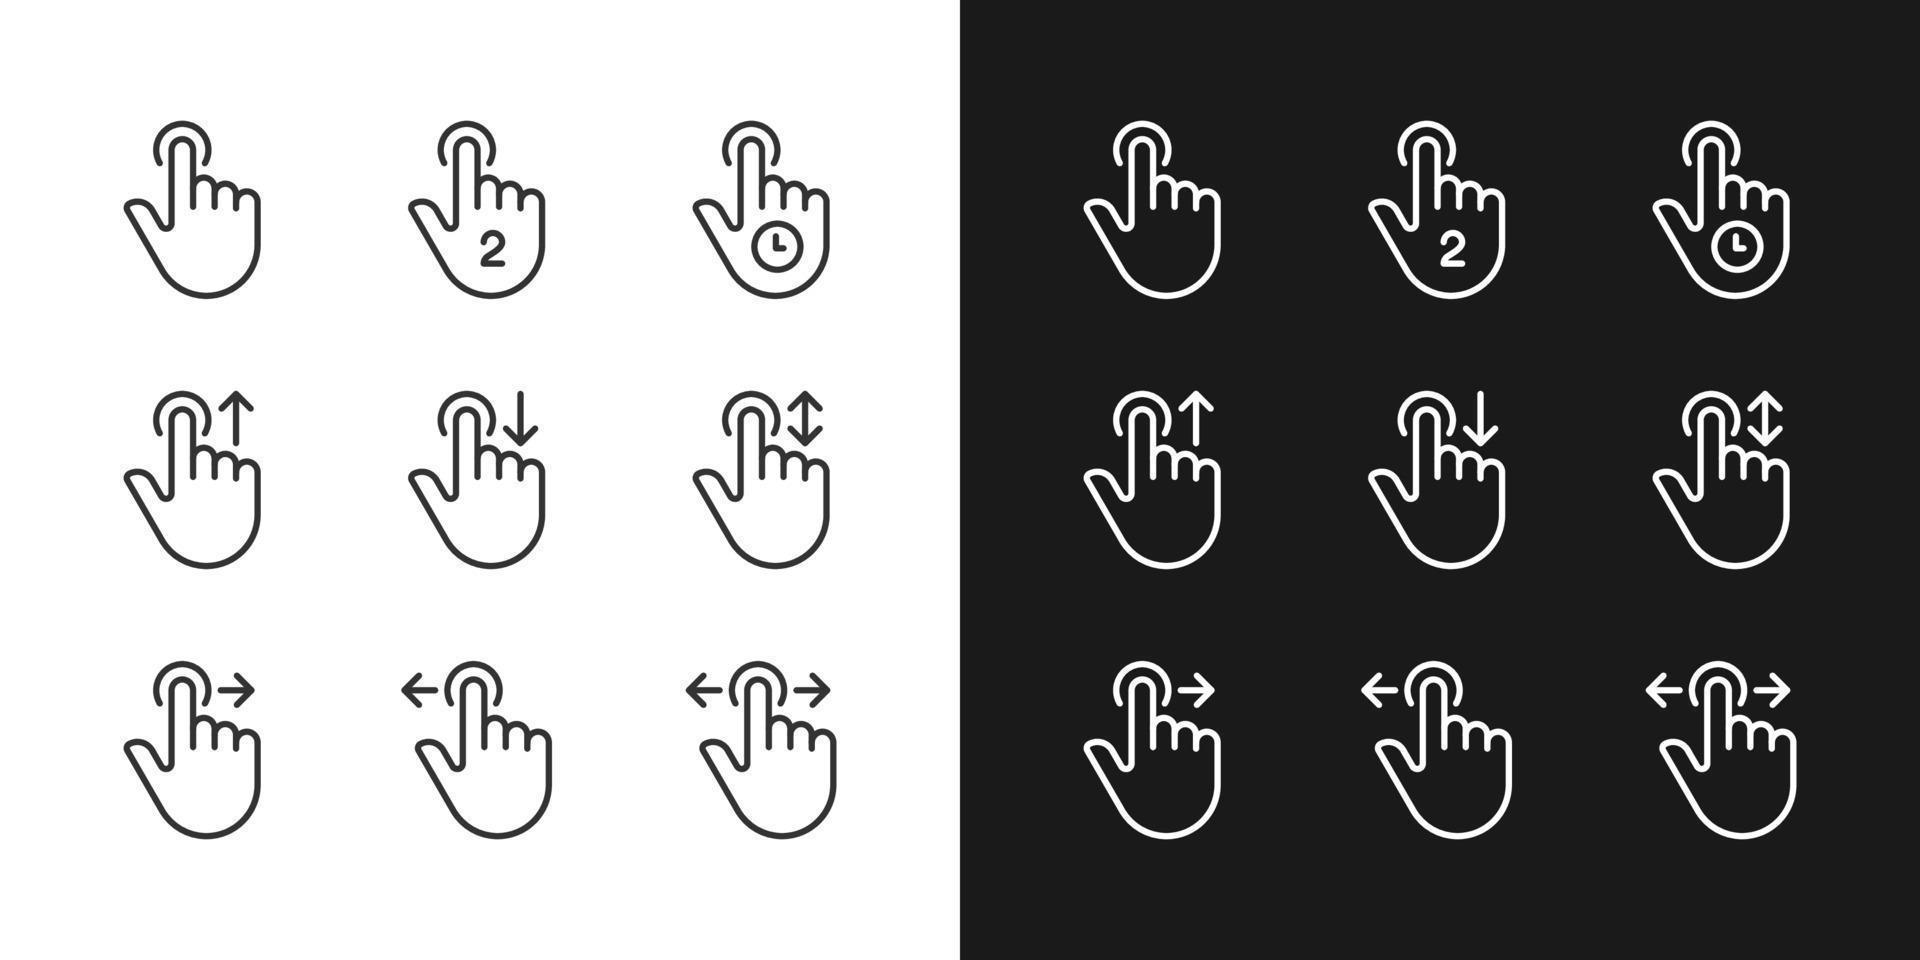 Touchscreen control pixel perfect linear icons set for dark, light mode. Navigation gestures. Smartphone and tablet. Thin line symbols for night, day theme. Isolated illustrations. Editable stroke vector